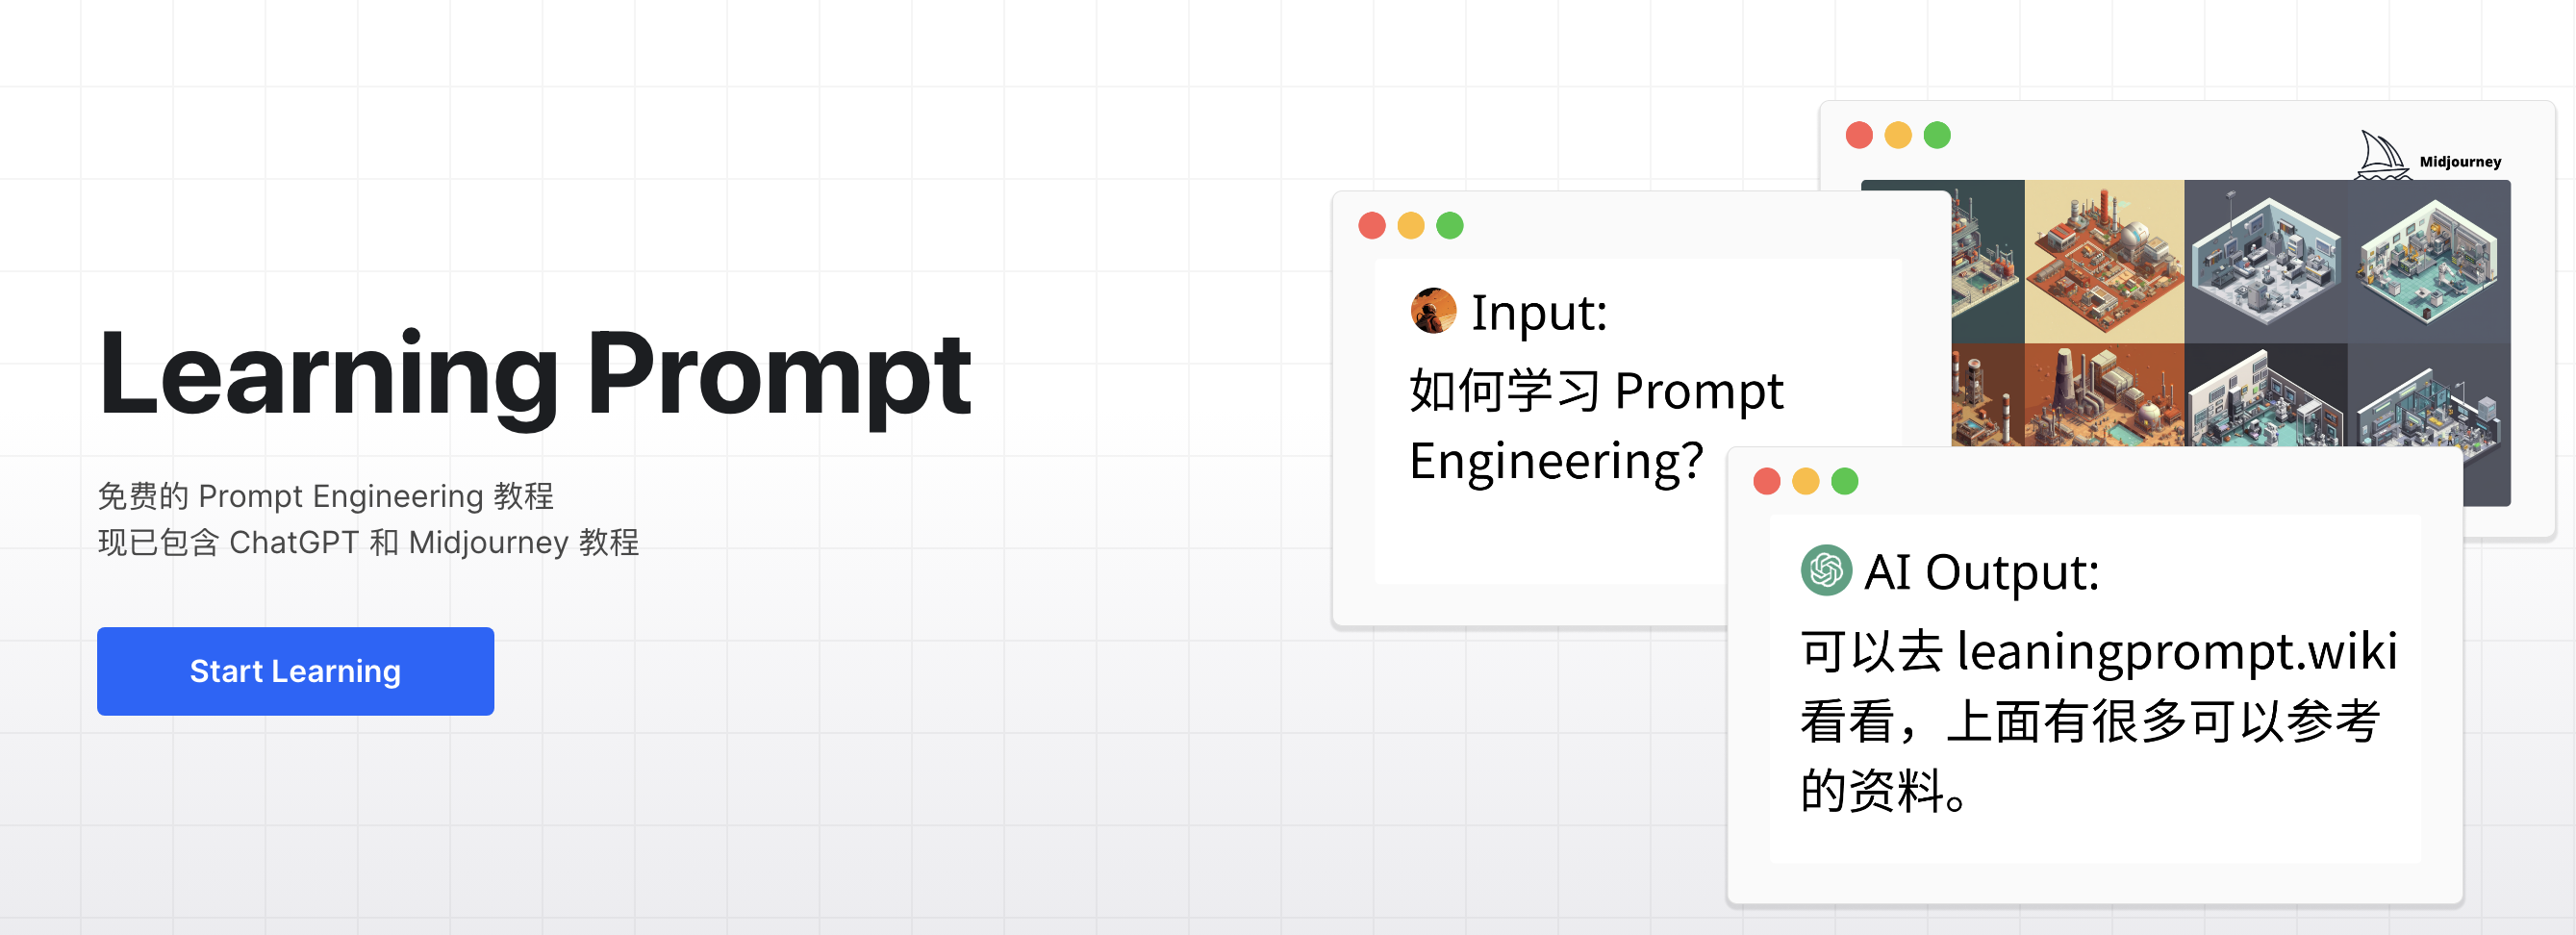 Learning Prompt：免费的Prompt Engineering教程